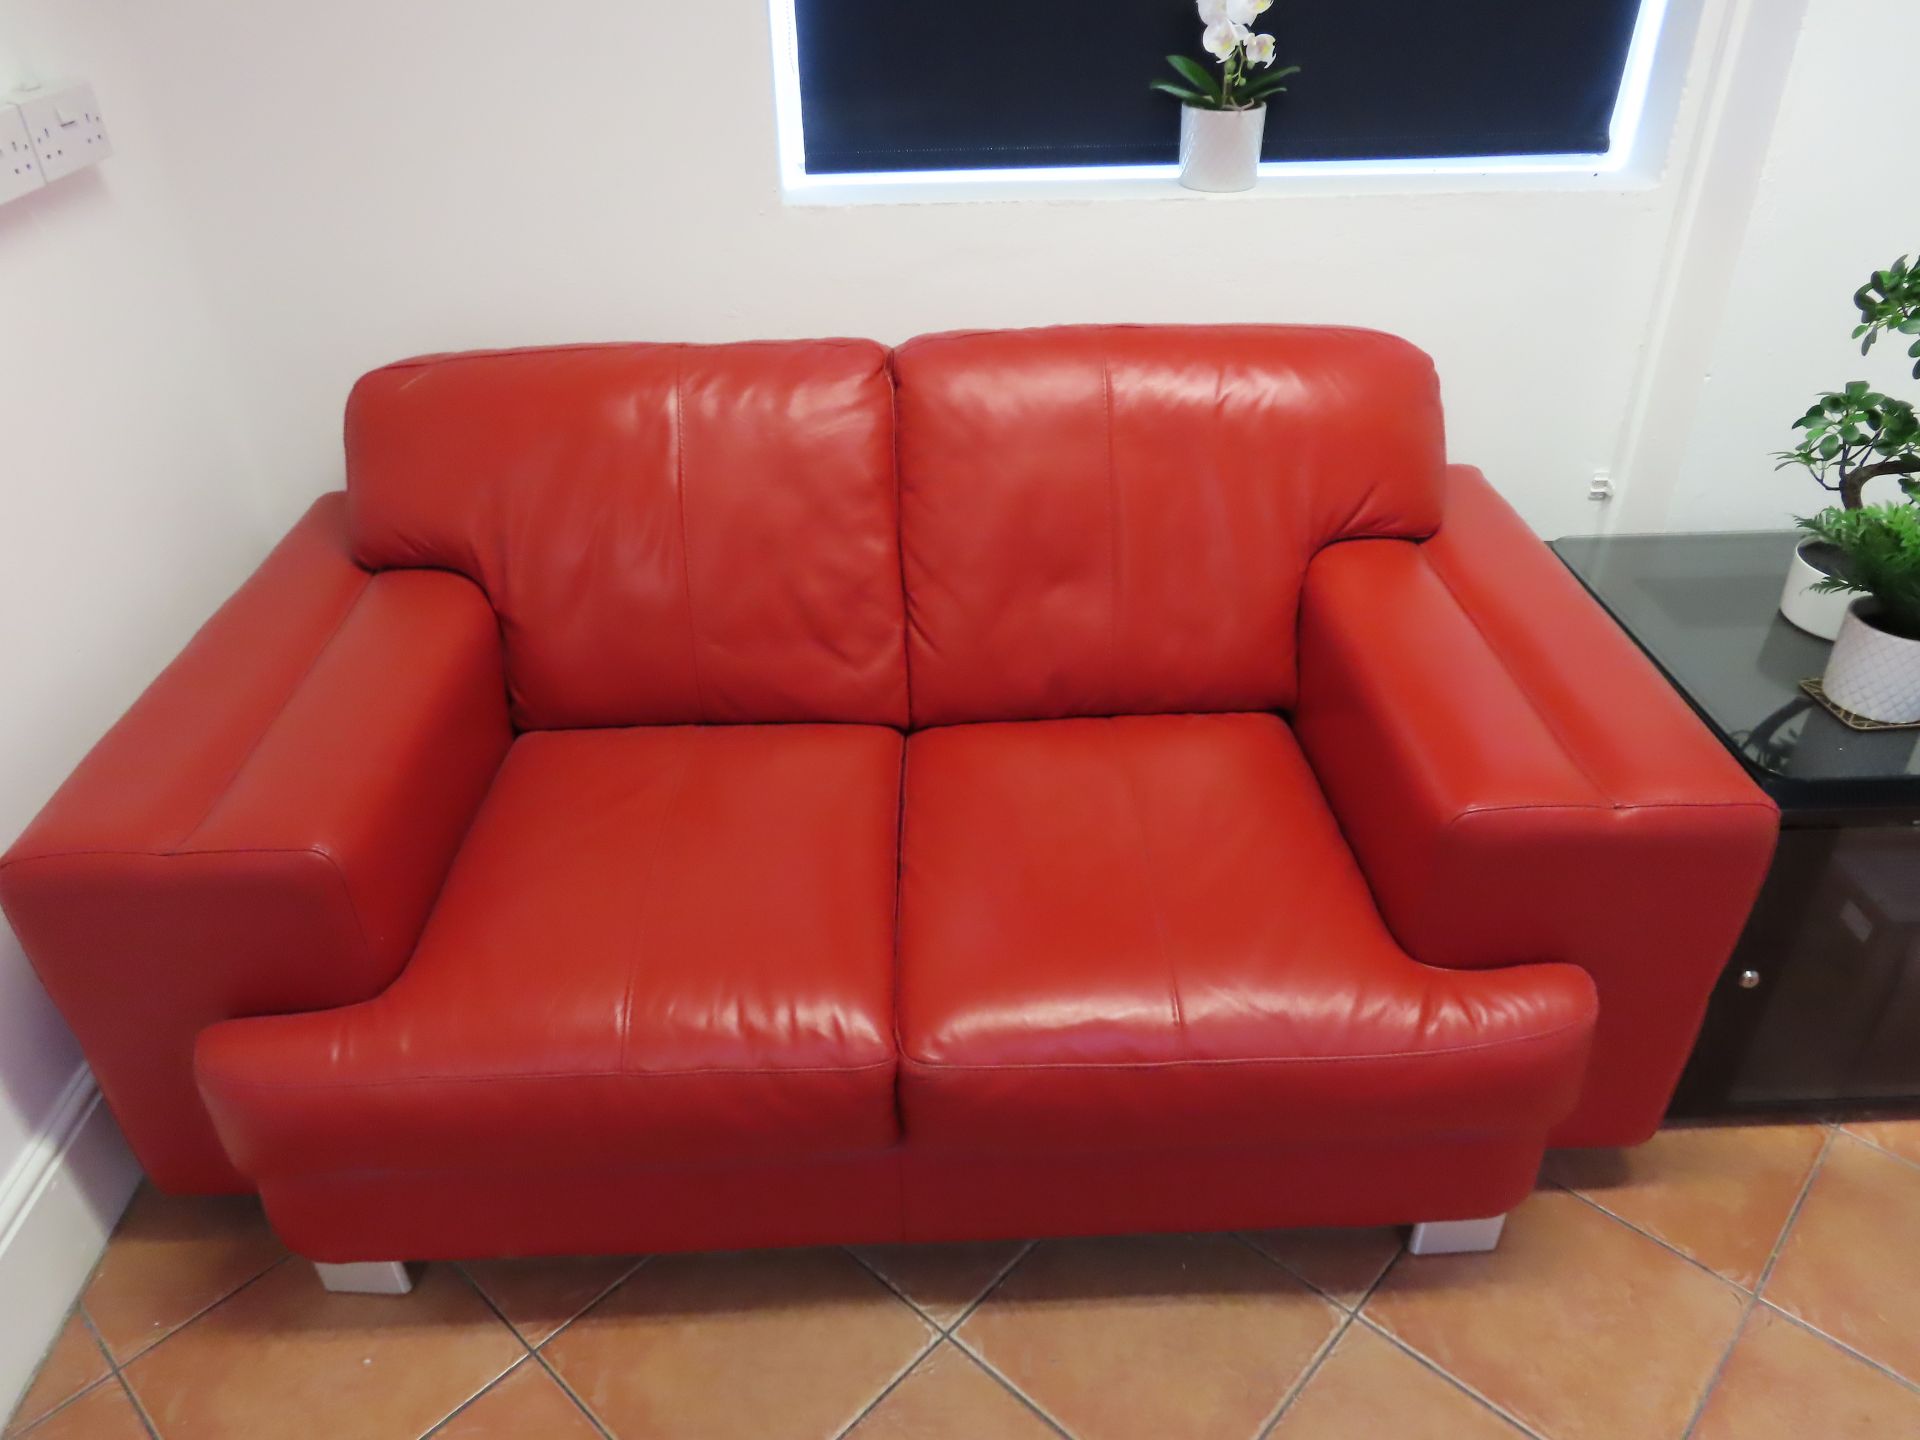 RED LEATHER SUITE. - Image 2 of 4